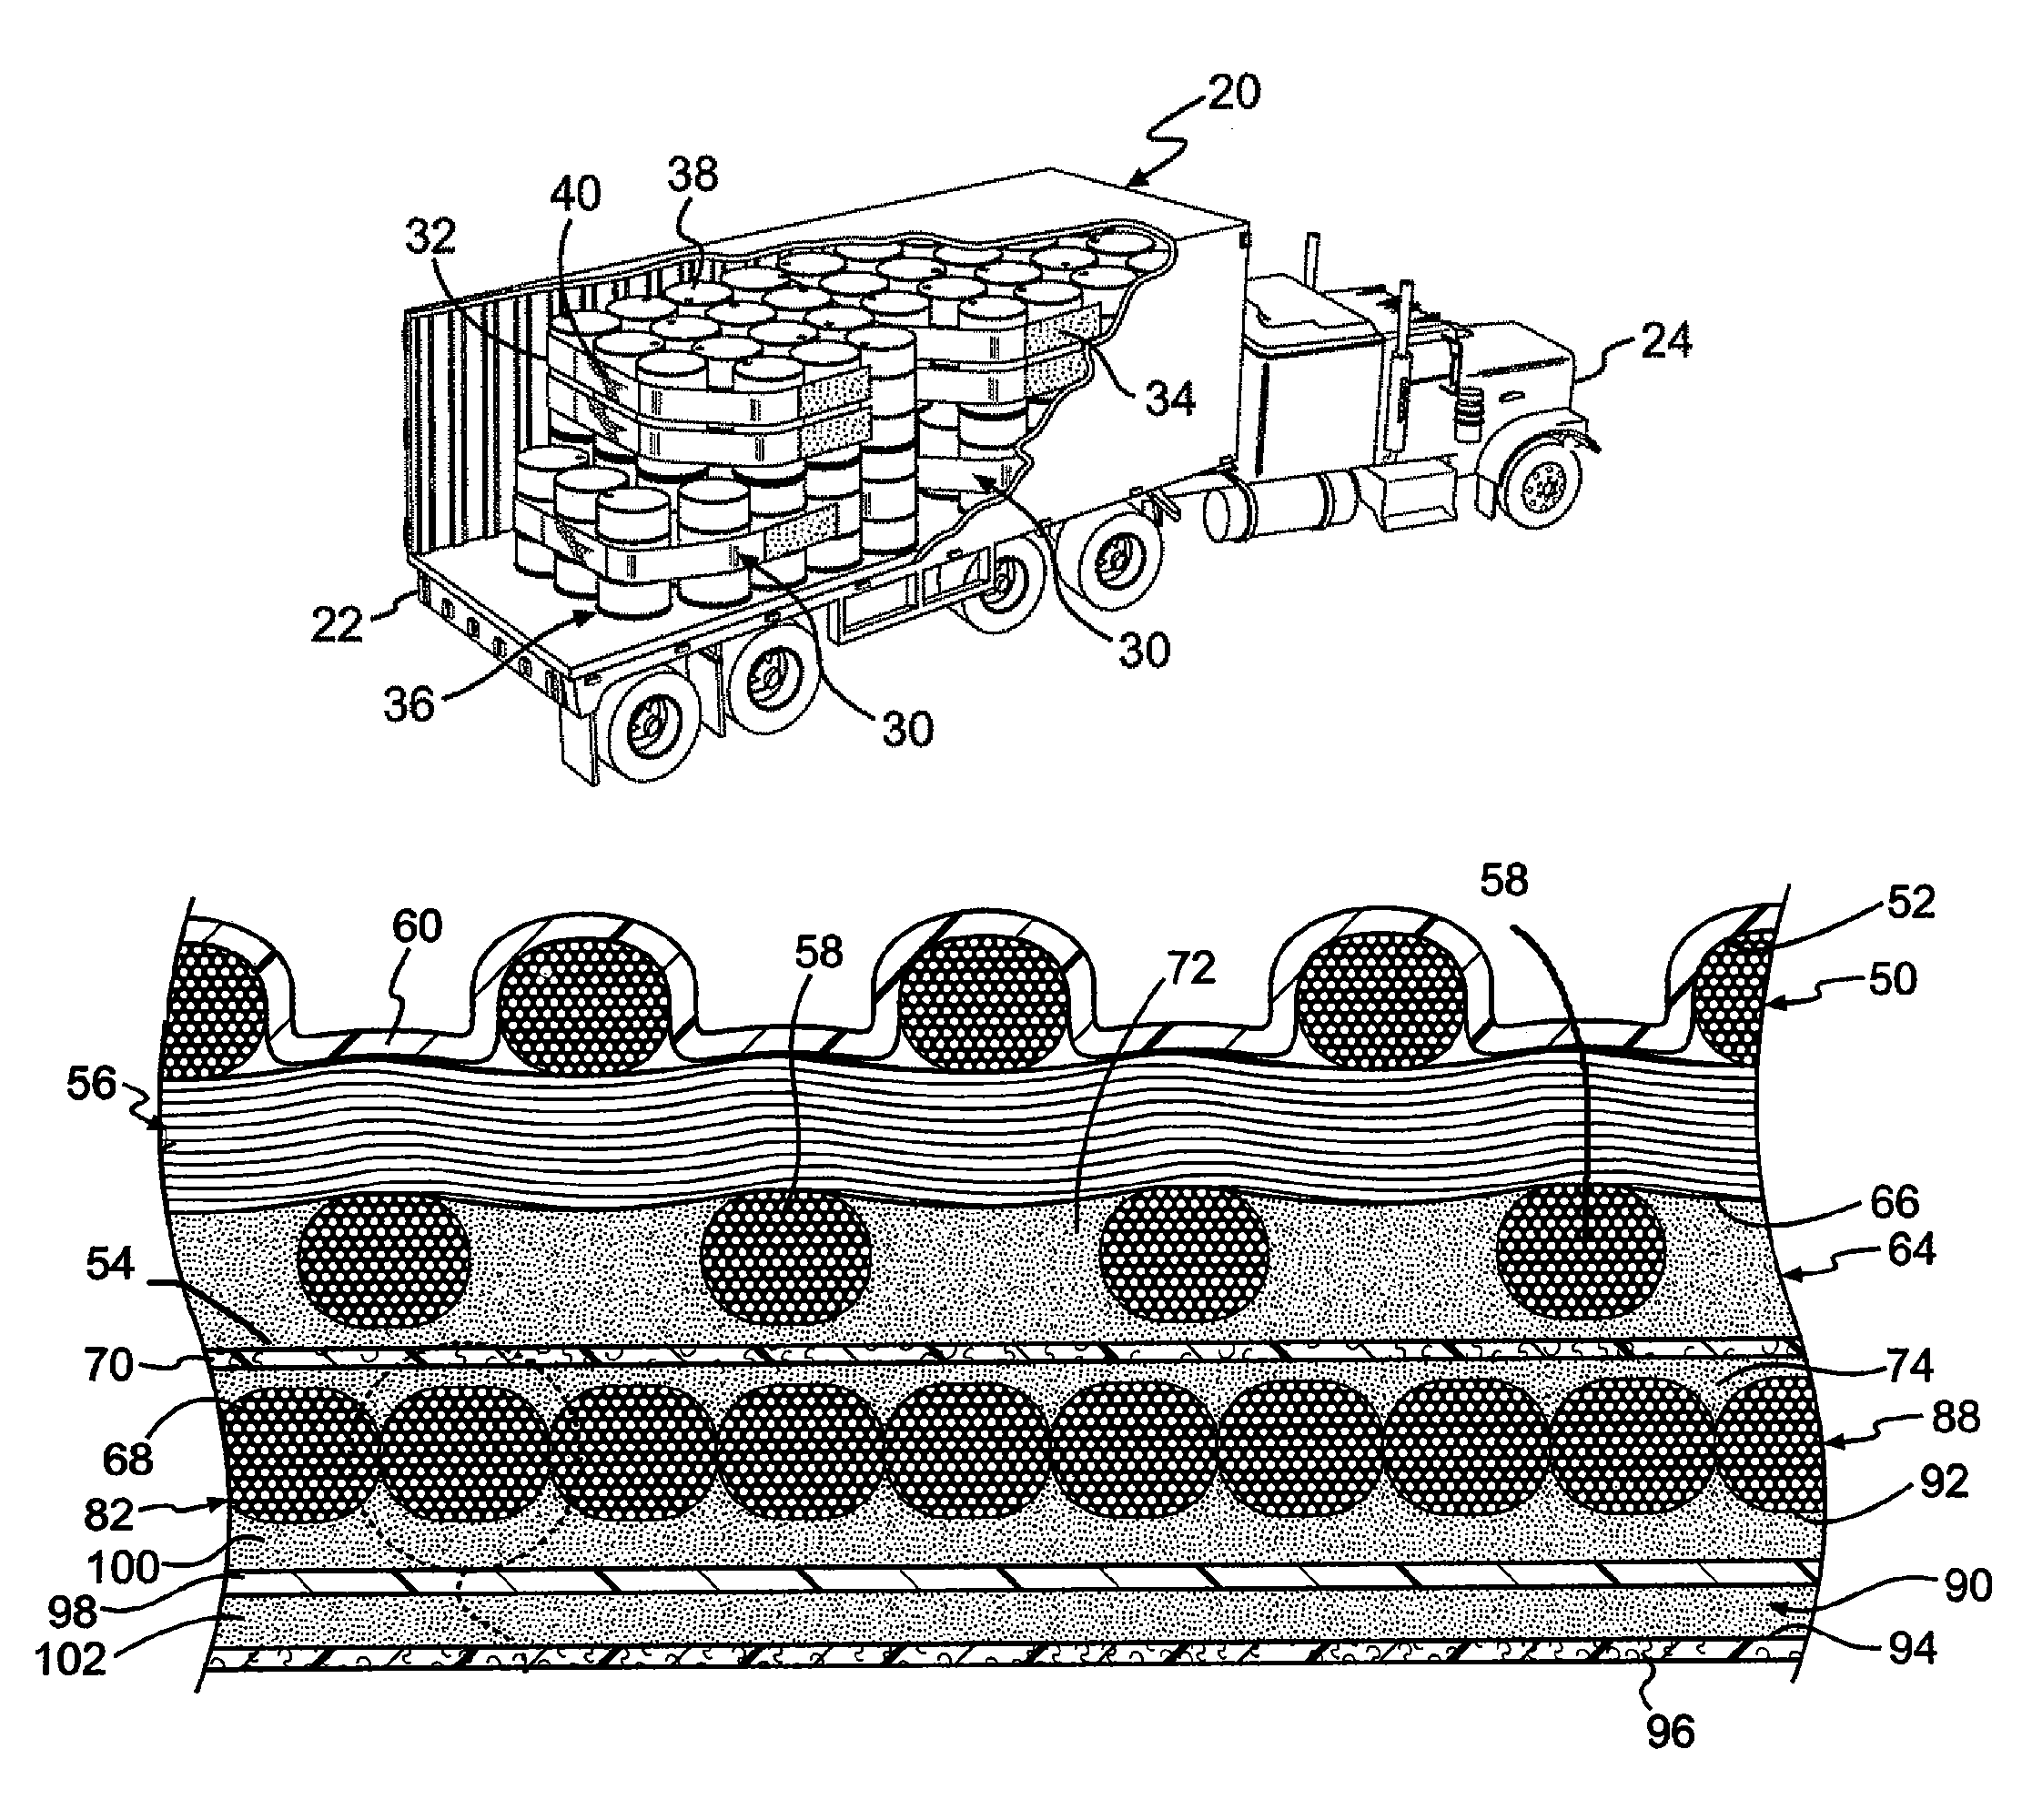 Cross-weave cargo restraint system and method